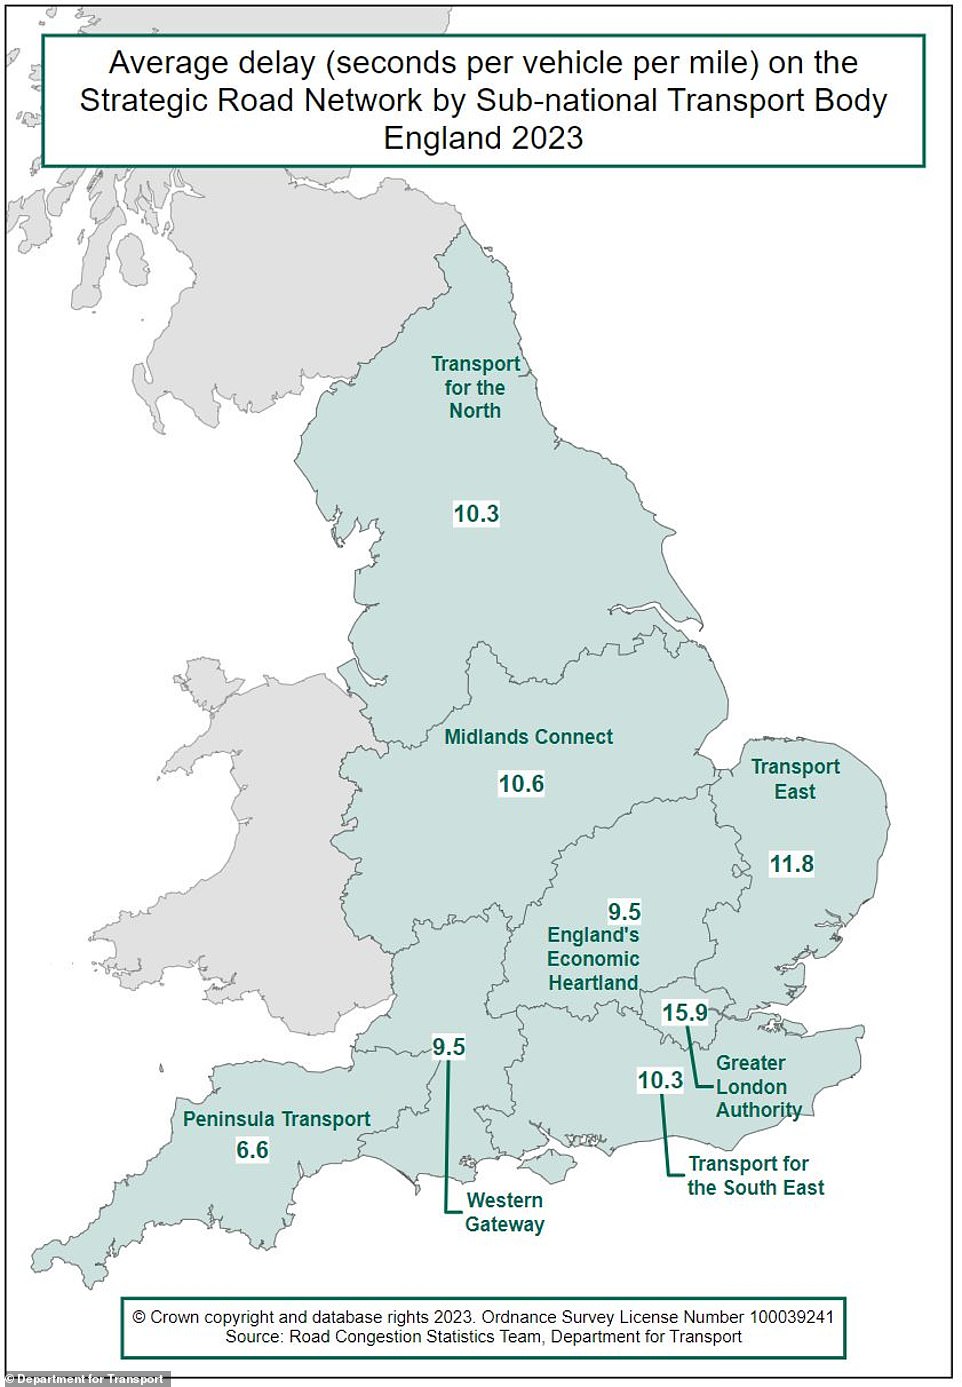 This map infographic shows the regional breakdown of average delay times in each area.  Unsurprisingly, London has the longest delays on its main roads, at 15.9 seconds per mile